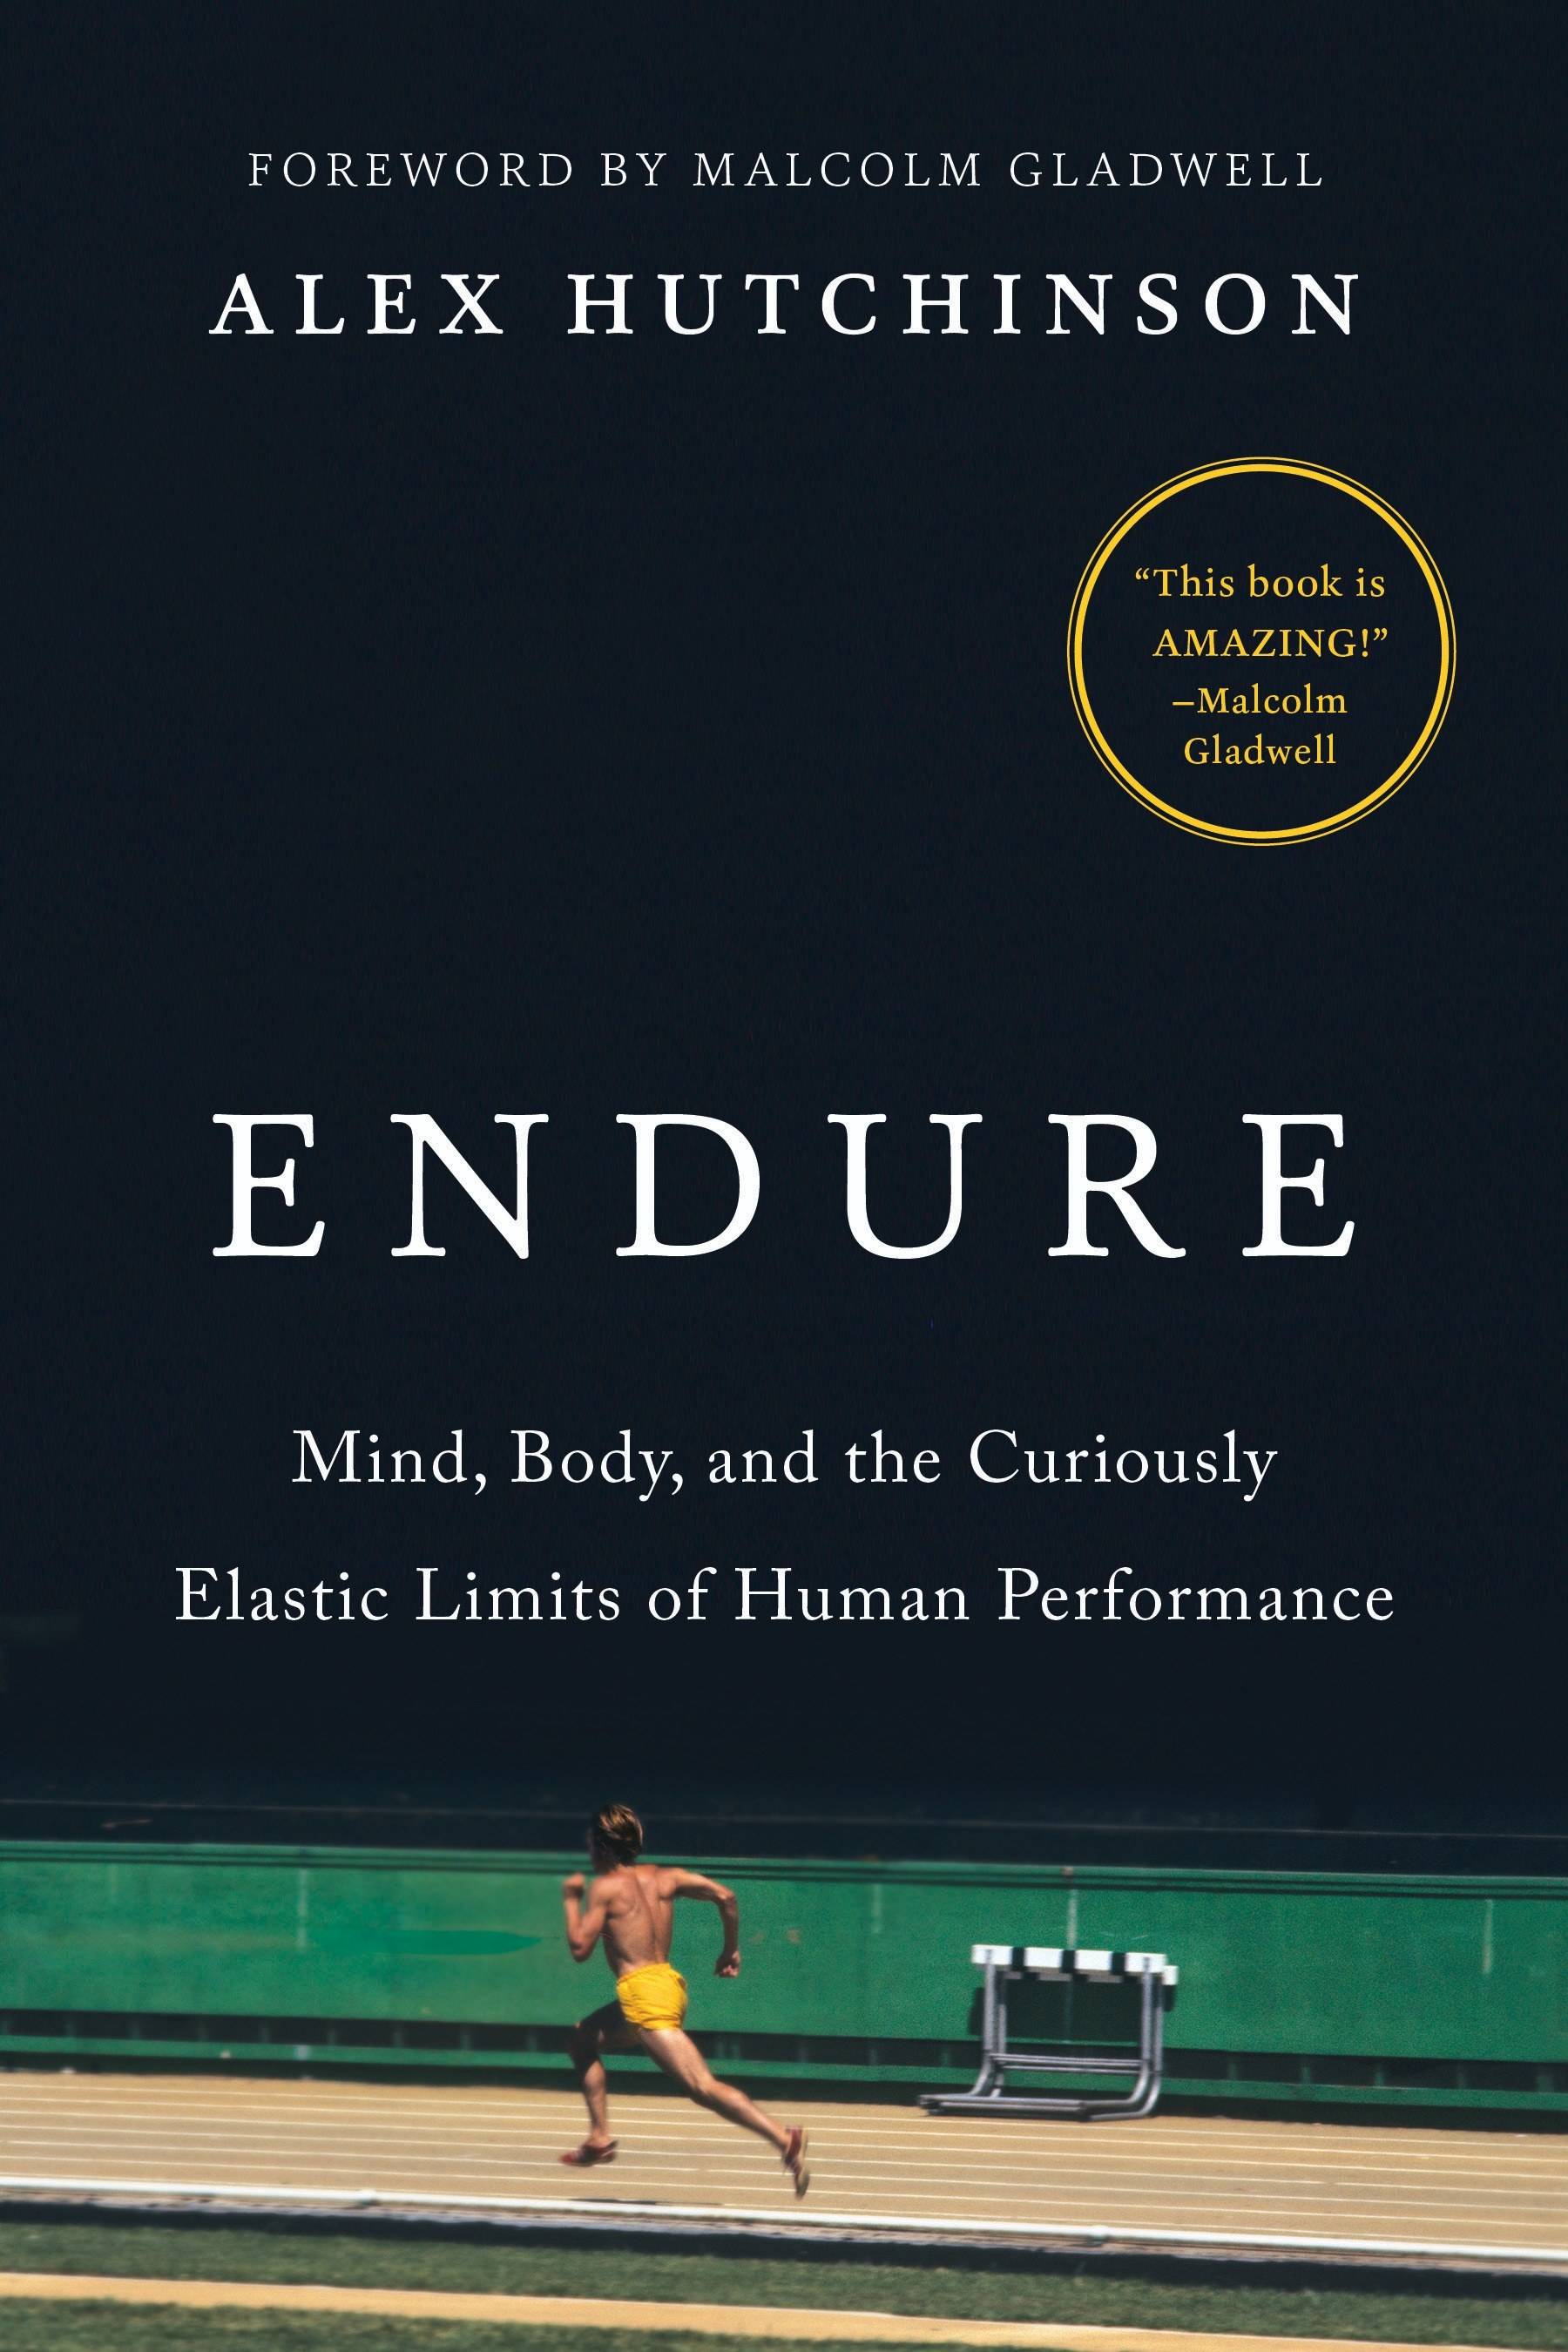 The Bookworm Sez: Find everyday relevance in ‘Endure’